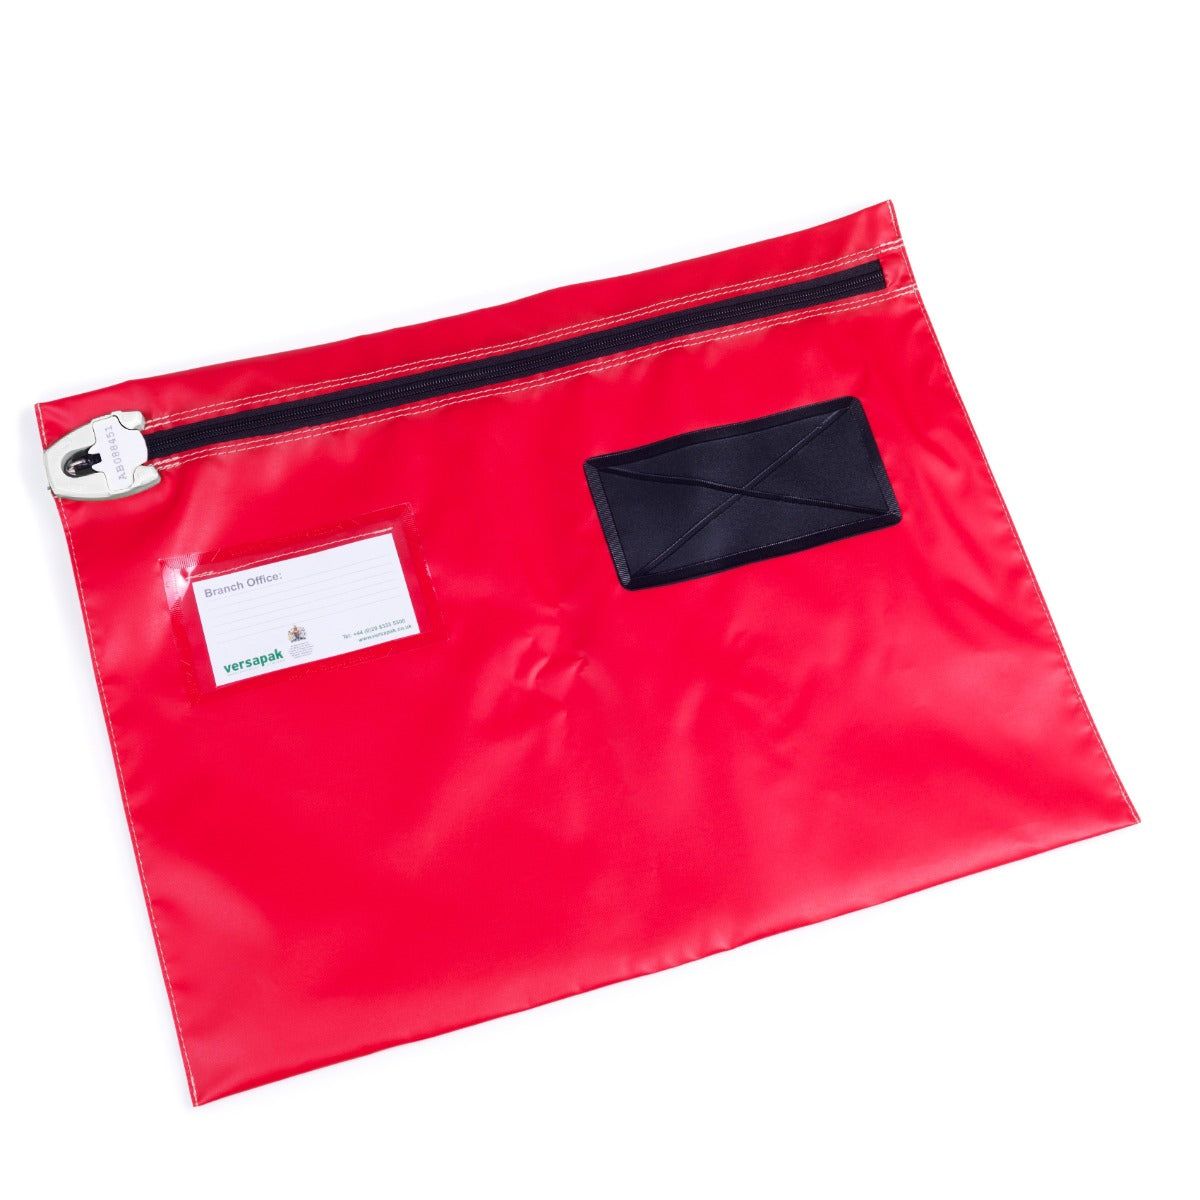 Versapak Flat Document Wallet - Wide Opening VCF3 T2 Red